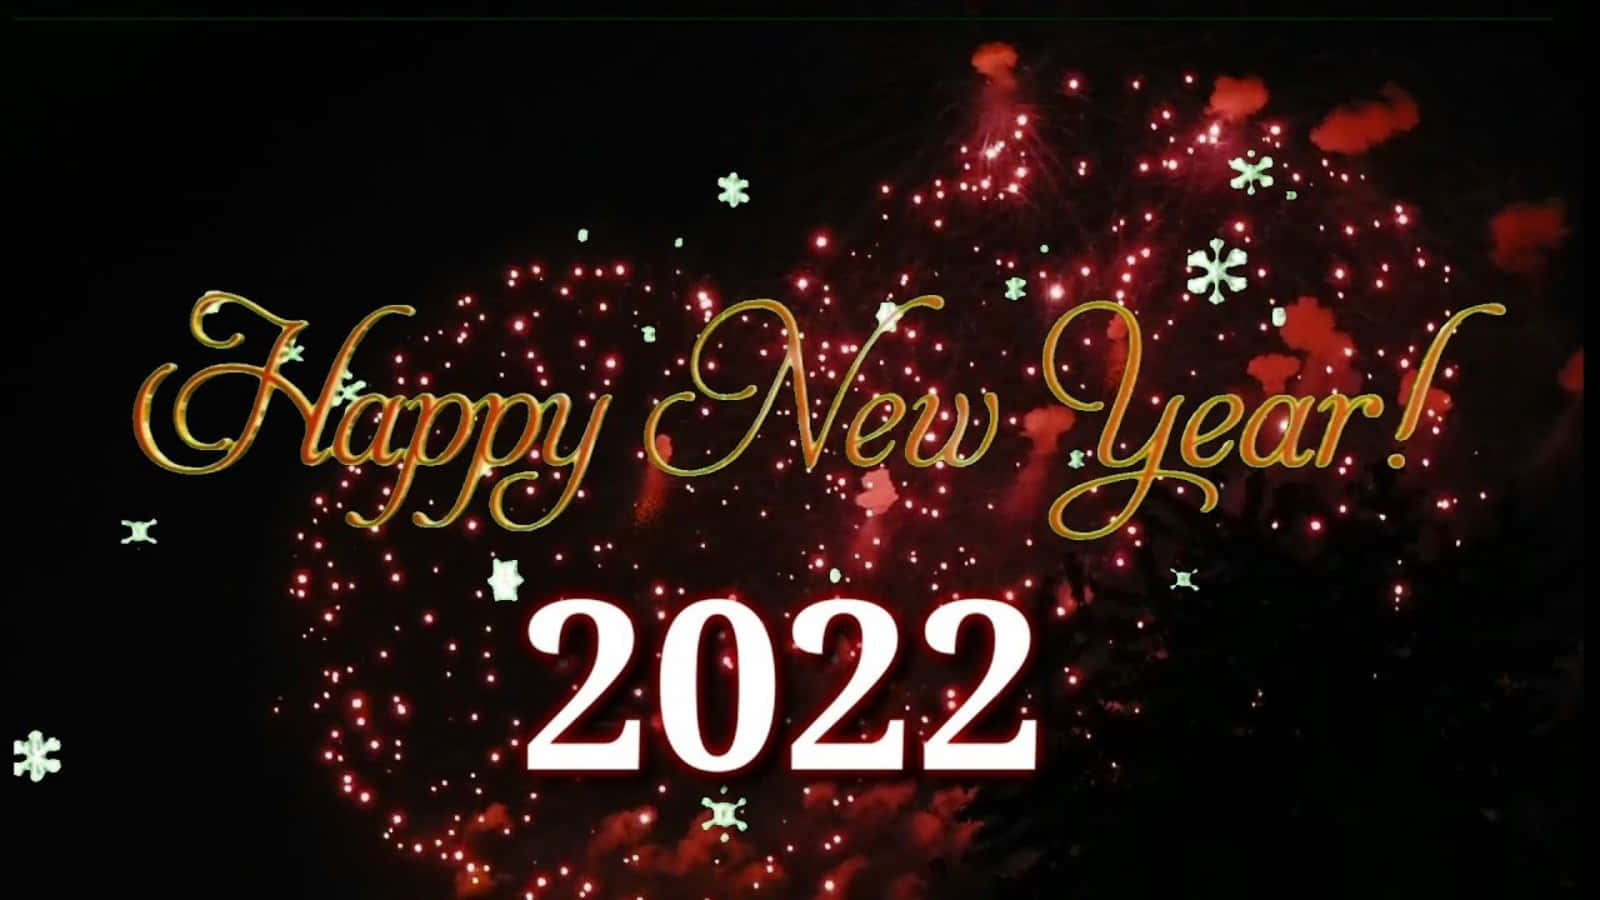 A fresh start for a Happy New Year 2022